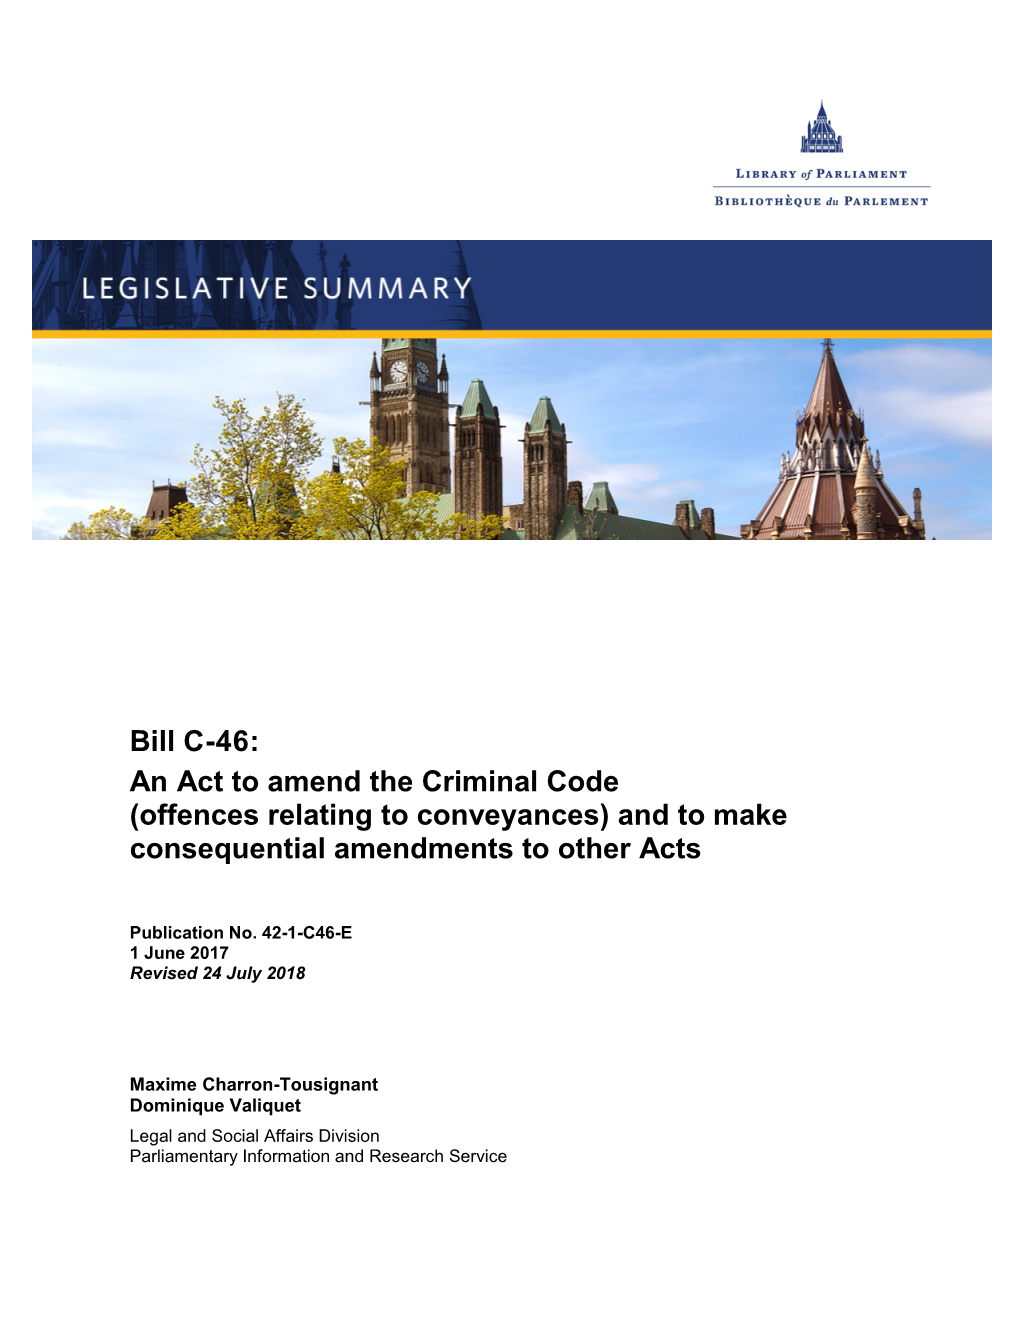 Bill C-46: an Act to Amend the Criminal Code (Offences Relating to Conveyances) and to Make Consequential Amendments to Other Acts